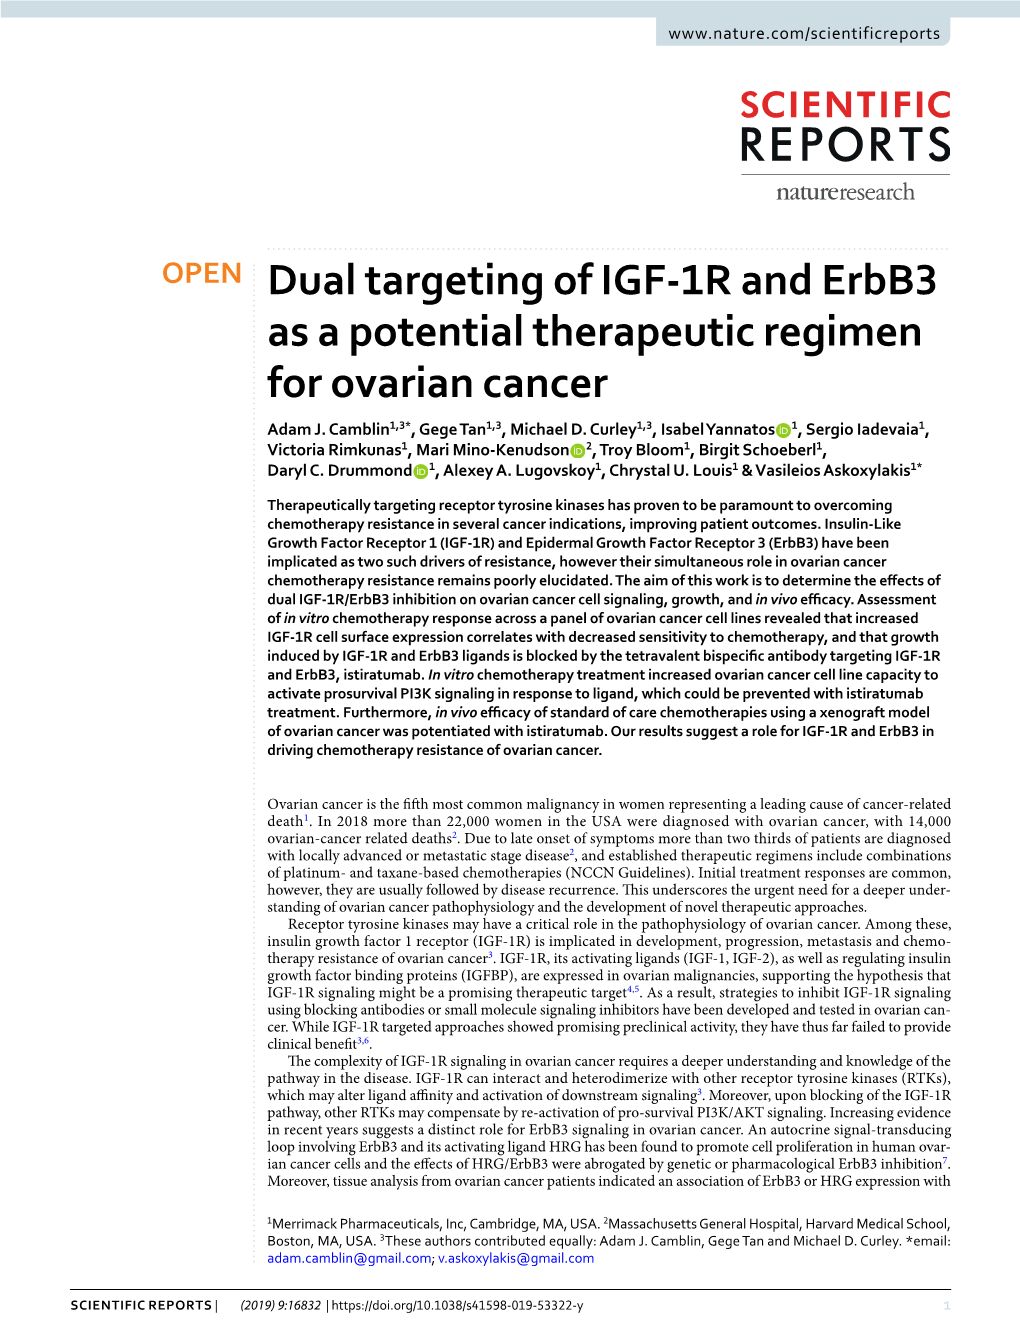 Dual Targeting of IGF-1R and Erbb3 As a Potential Therapeutic Regimen for Ovarian Cancer Adam J